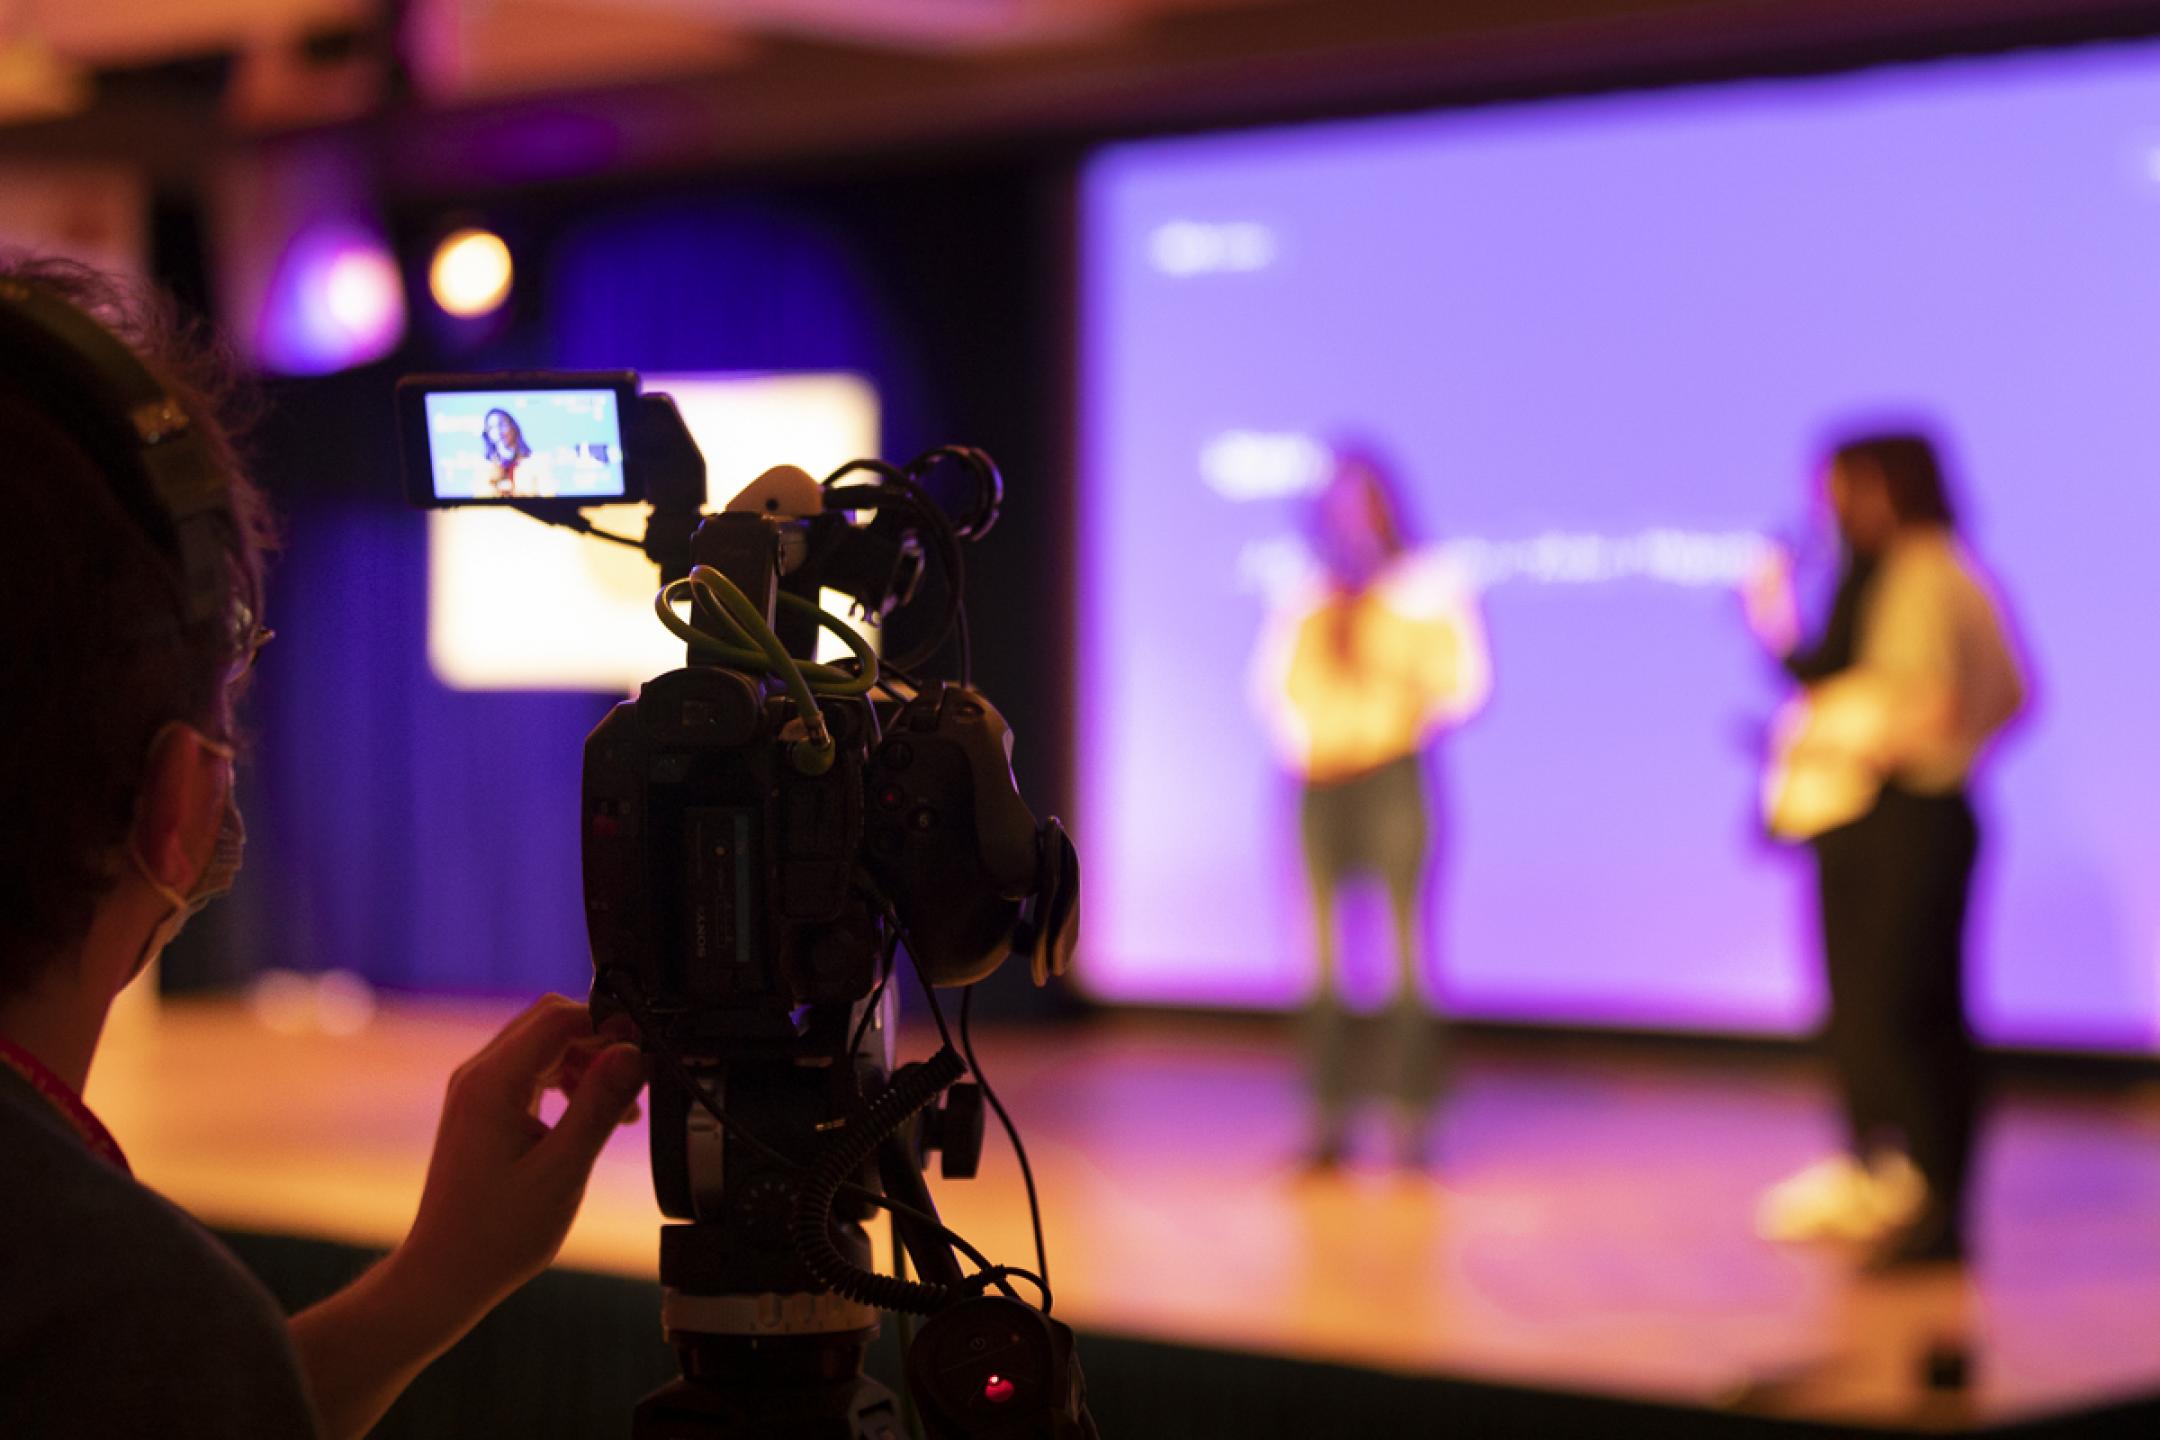 A tripod camera in the foreground. In the background, three people present on an event stage. 